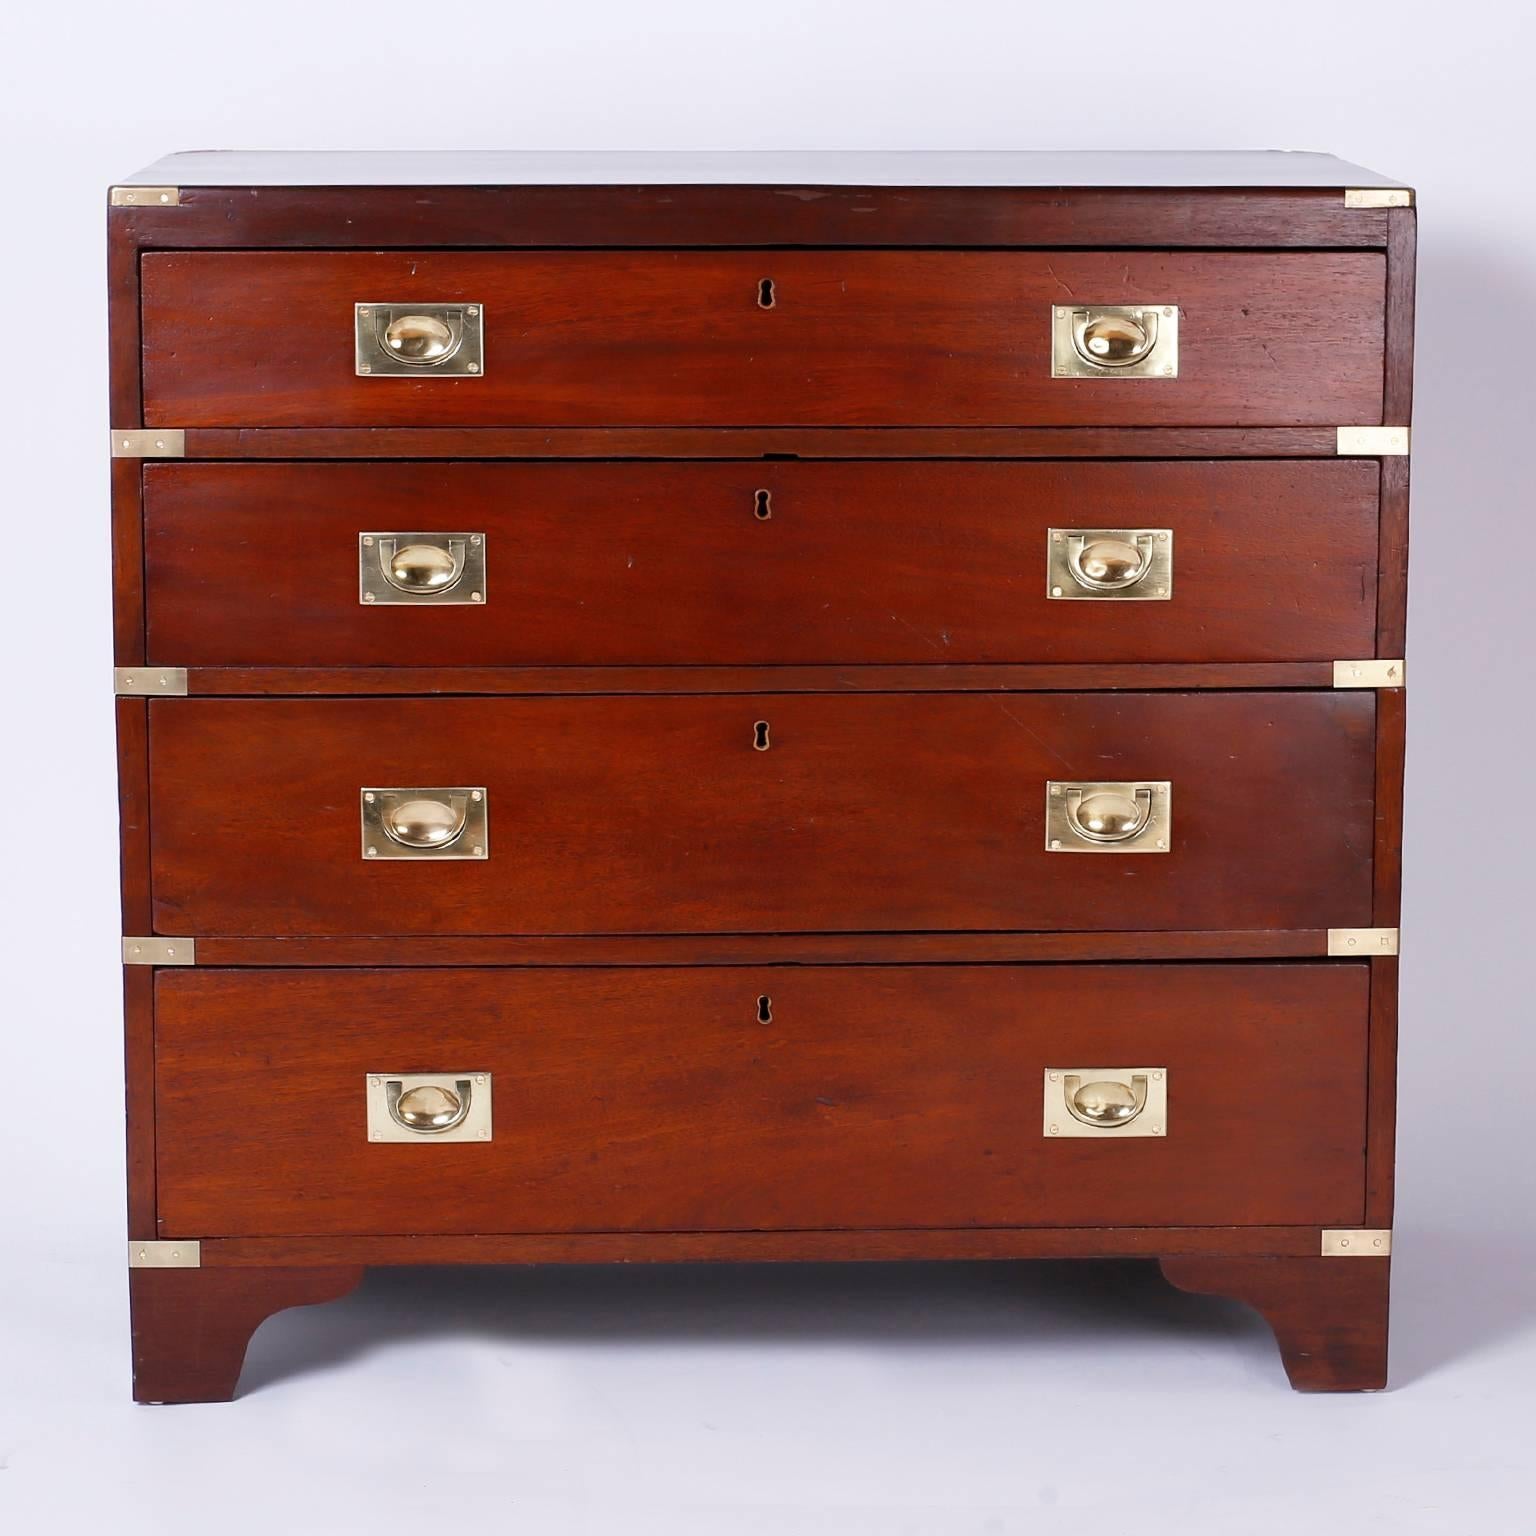 Authentic English officers Campaign chest with four drawers and
retaining its original brass hardware. Crafted in two pieces with
mahogany and set on bracket feet. Battle tested and reinvigorated for
the next centuries.